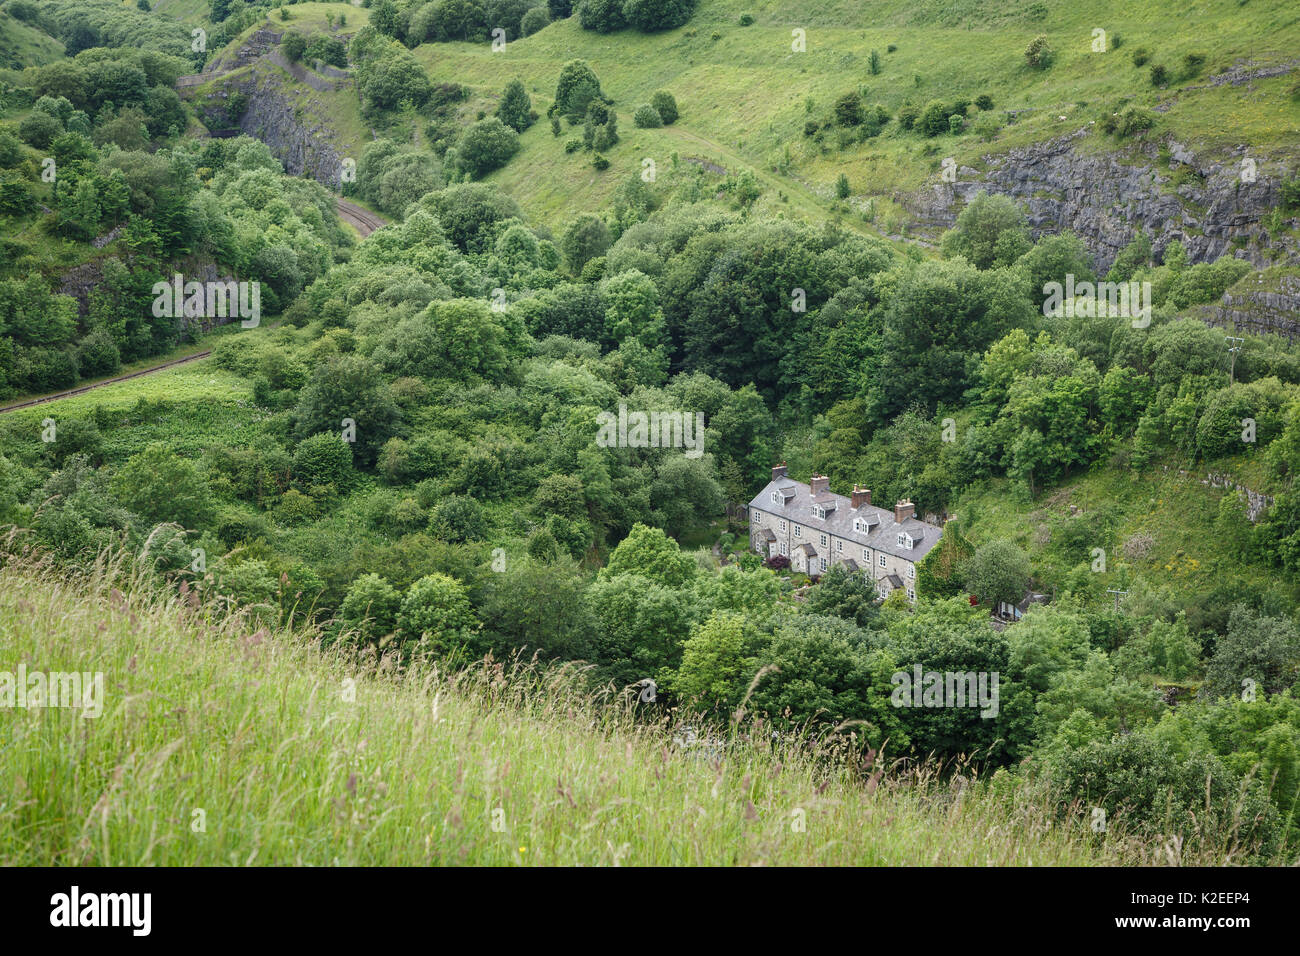 Railway cottages, Chee Dale, Peak District National Park, Derbyshire, UK. Quarried limestone rockfaces can be seen along the ridge above. Stock Photo